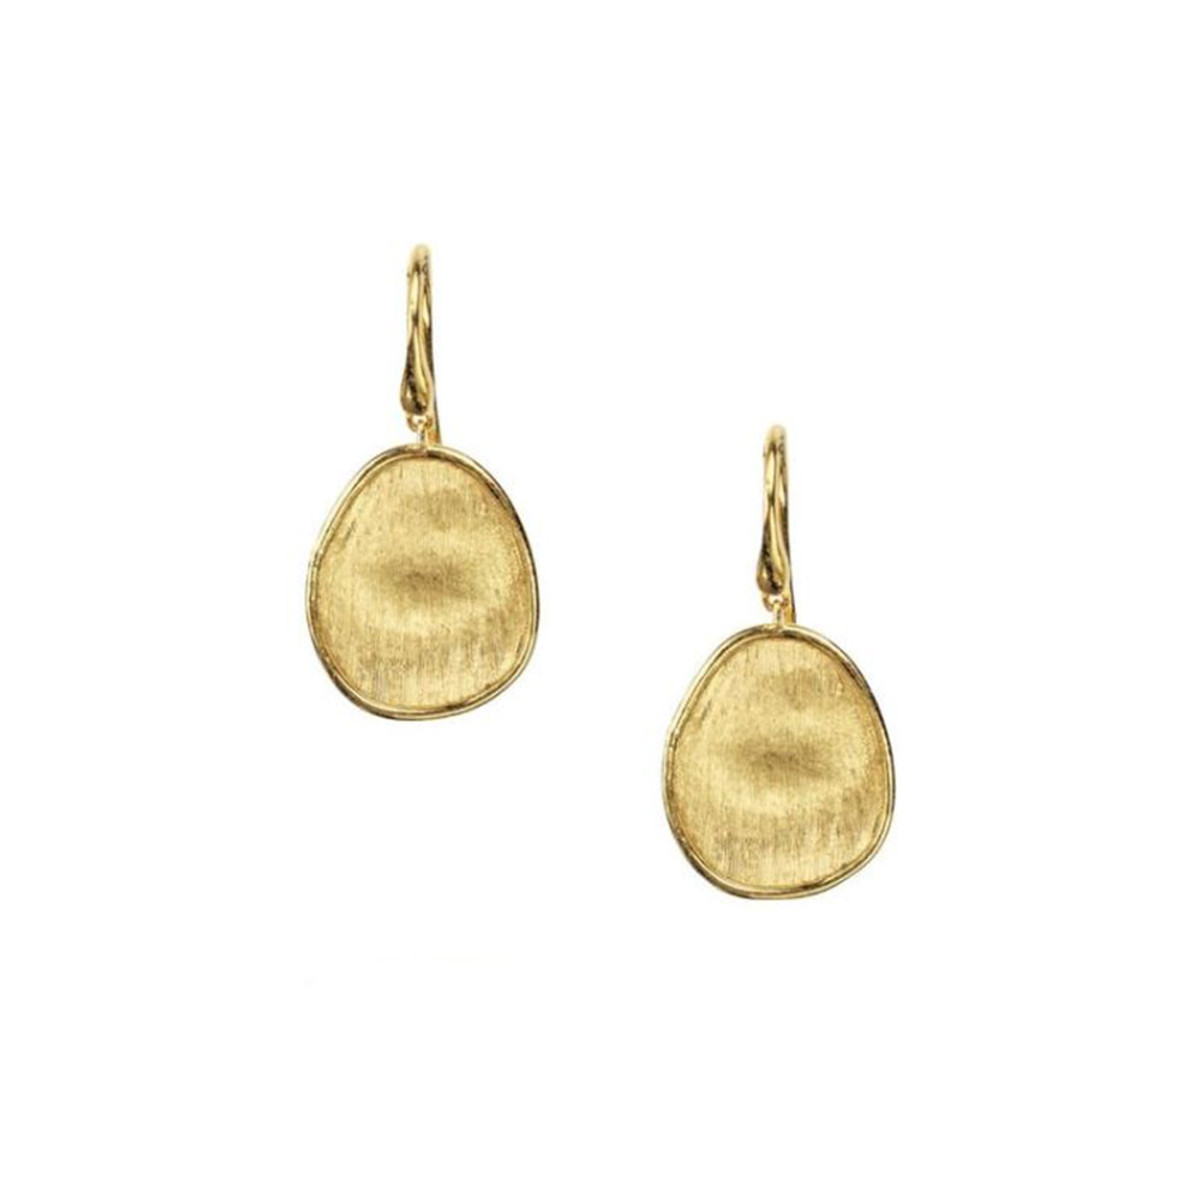 Marco Bicego Lunaria 18K Yellow Gold Oval Drop Earrings-JER181511 Product Image